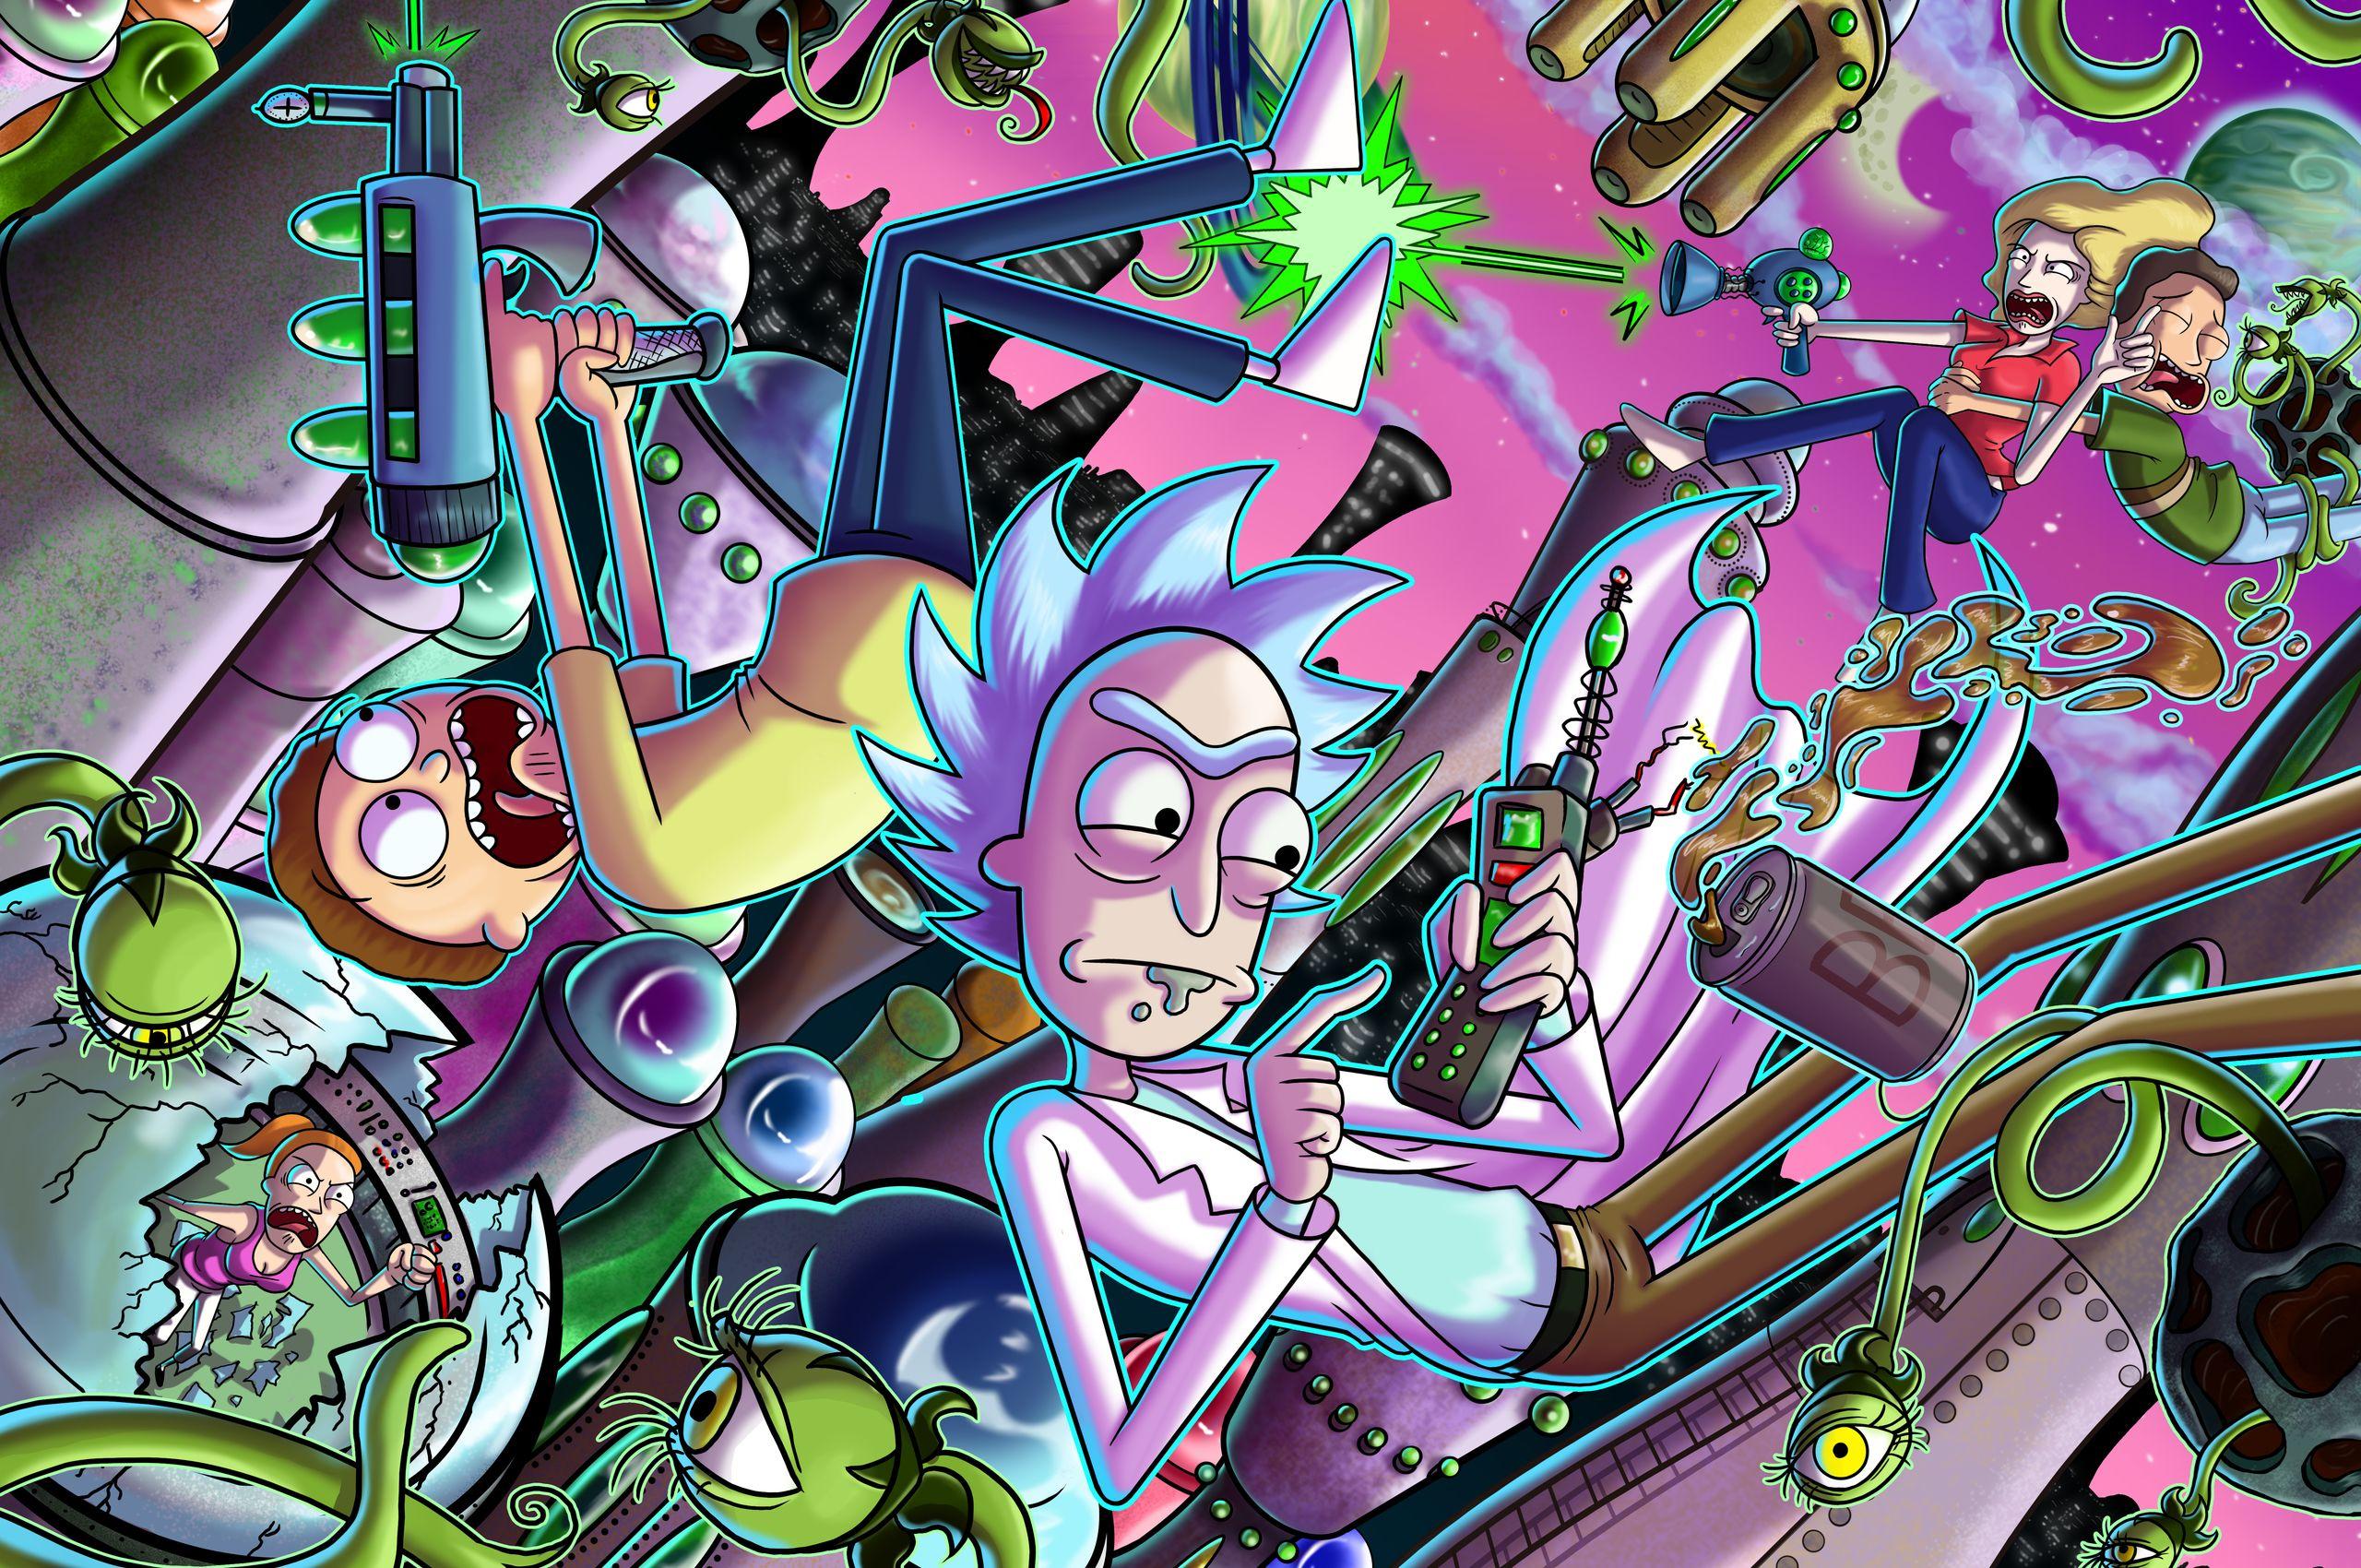 Rick and Morty Trippy Wallpaper Free Rick and Morty Trippy Background